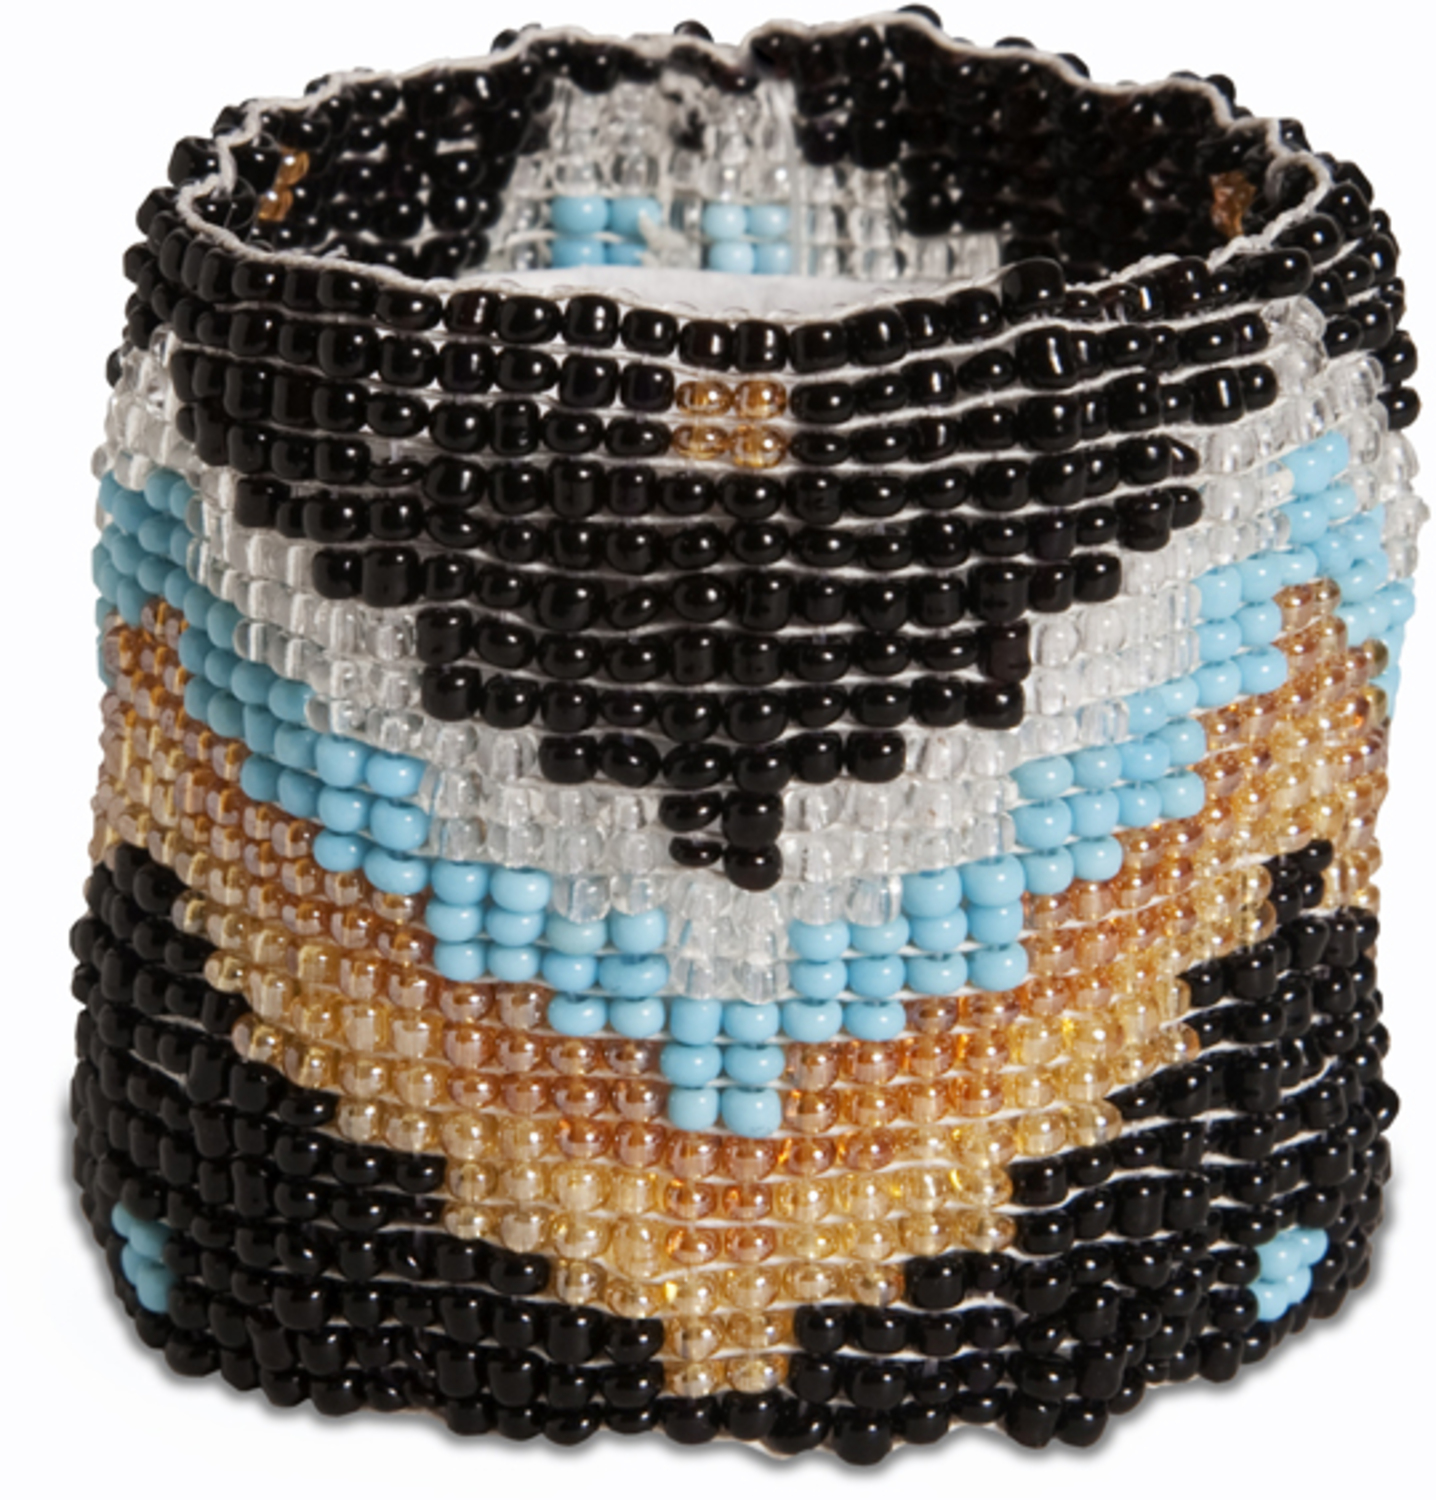 Moonlight by Tribal Chic Collection - Moonlight - 2" Beaded Stretch Bracelet